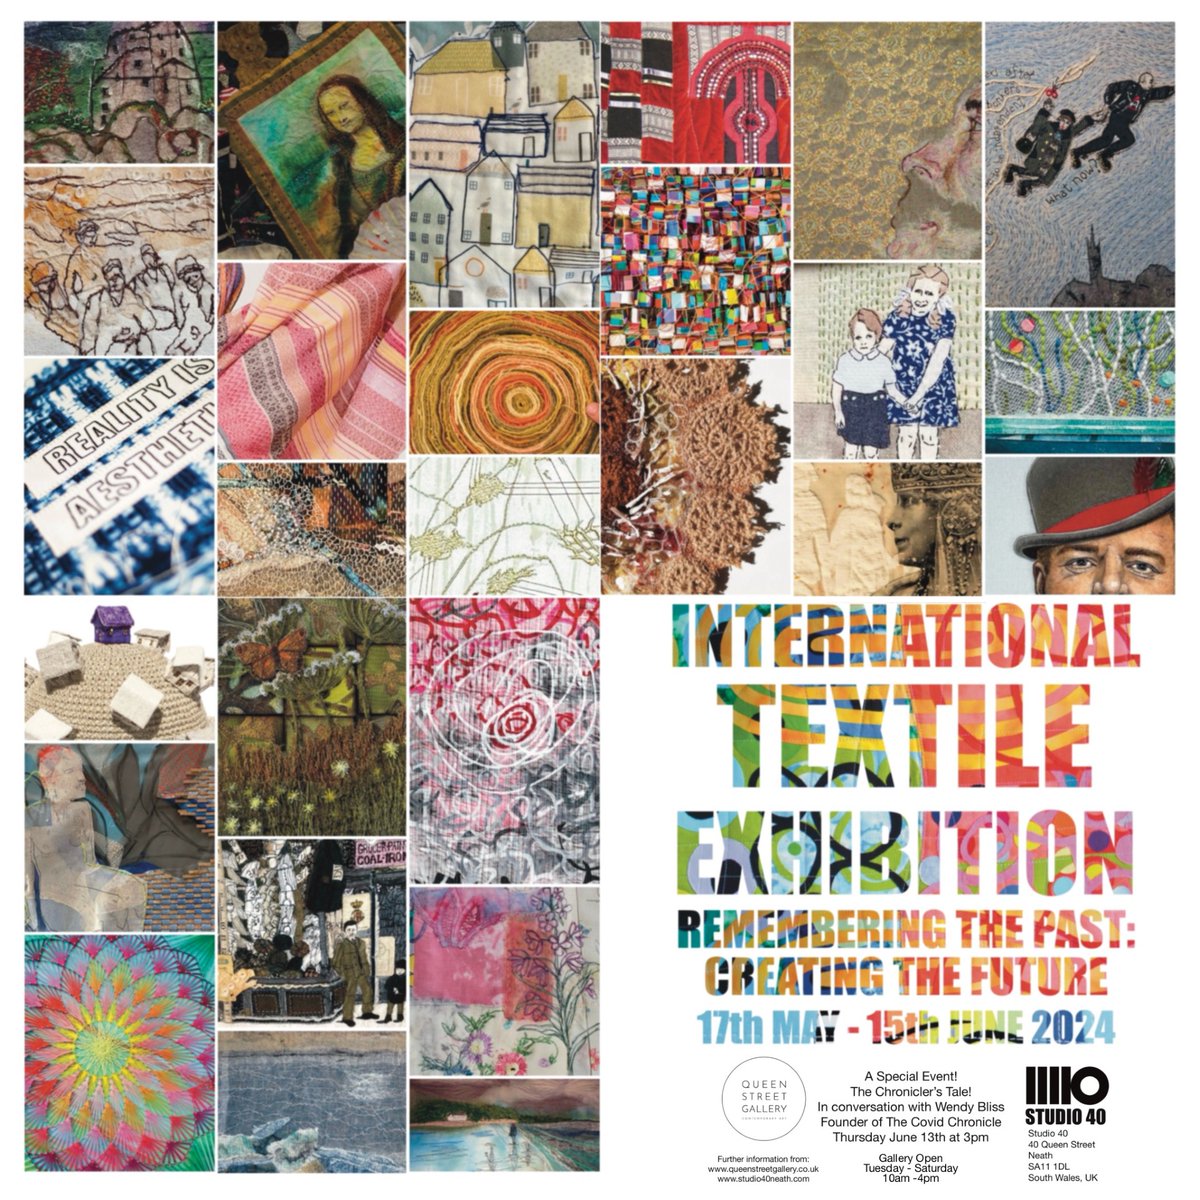 My artwork can currently be seen in the International Textile Exhibition at Queen Street Gallery, Neath, Wales. The show is on until June 15th.